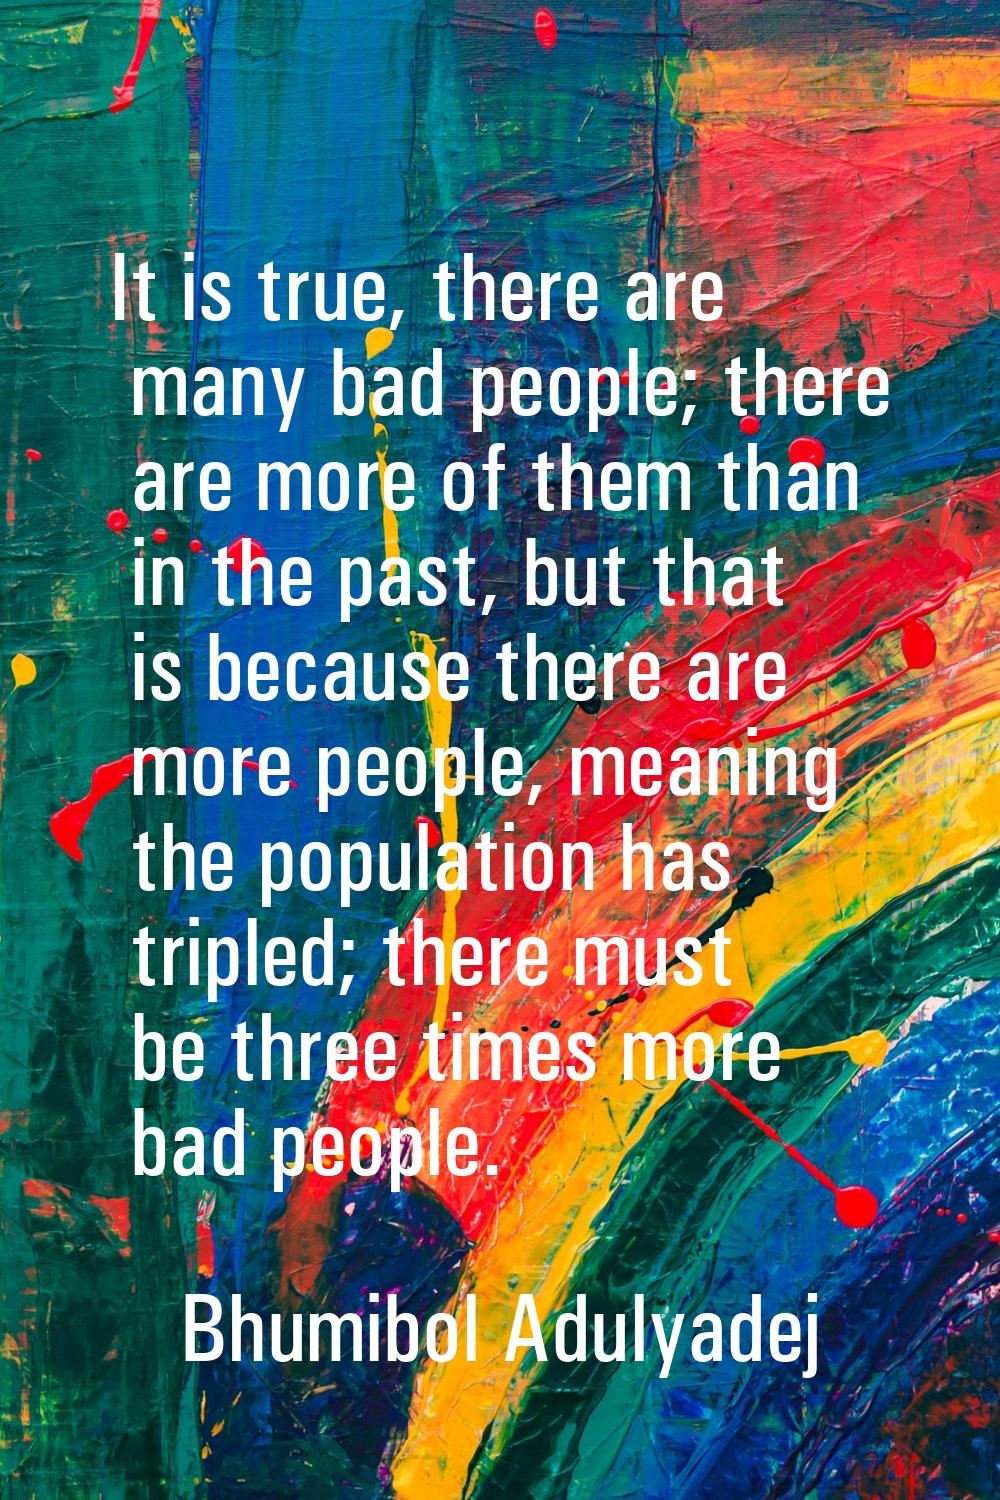 It is true, there are many bad people; there are more of them than in the past, but that is because